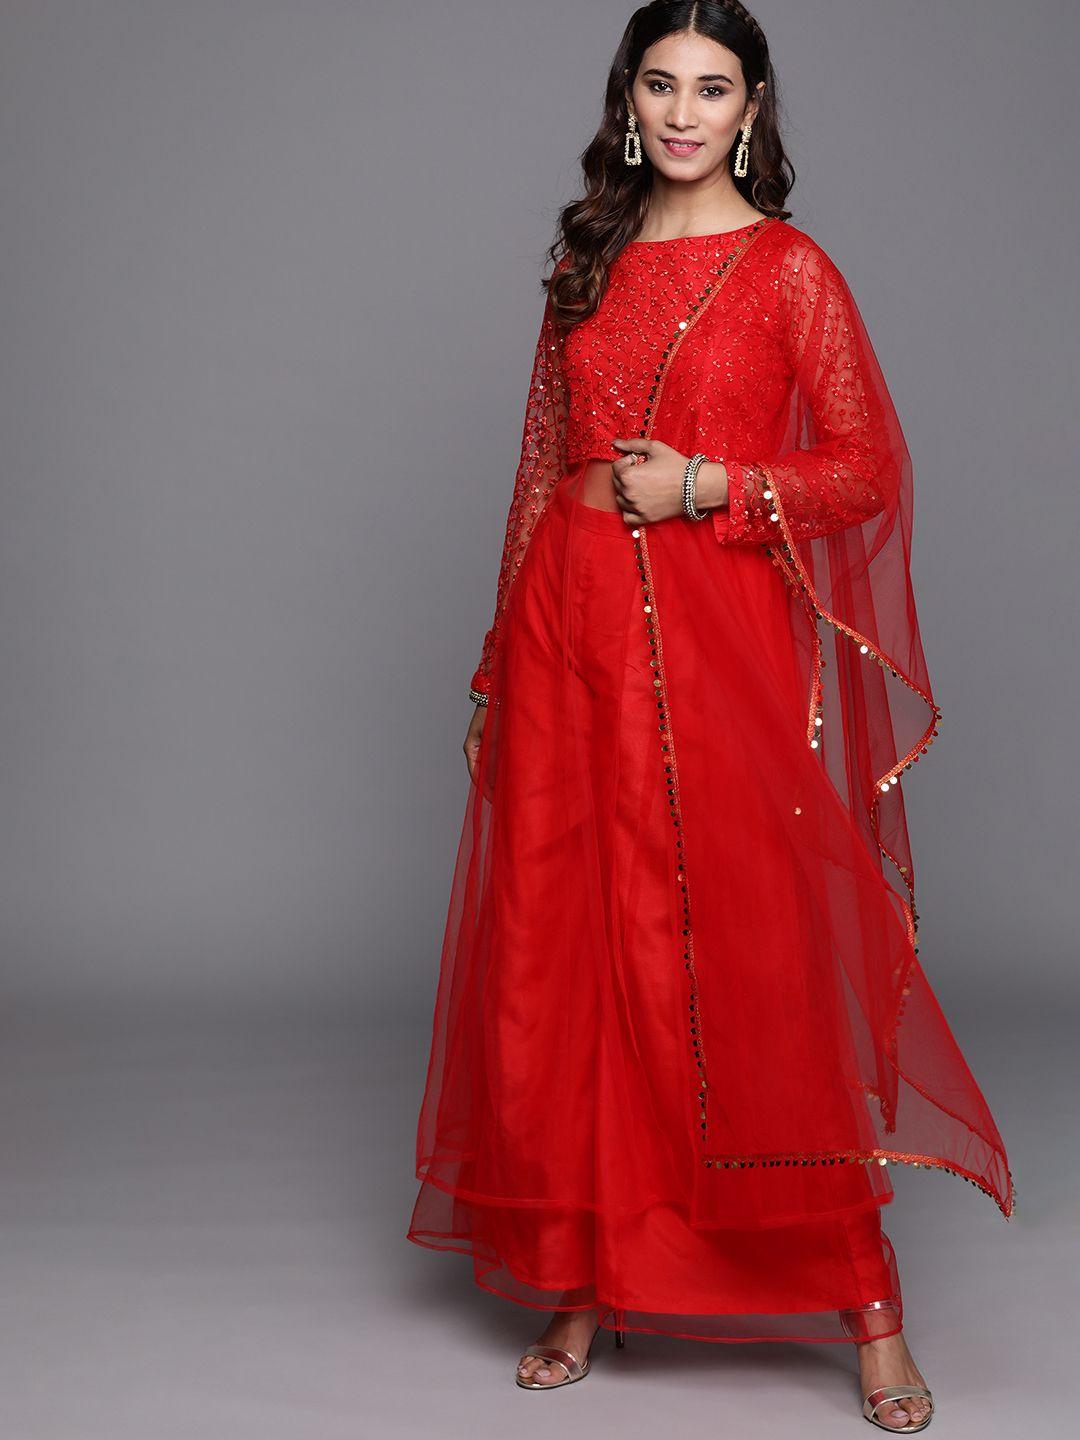 inddus women red sequinned top with palazzos & dupatta